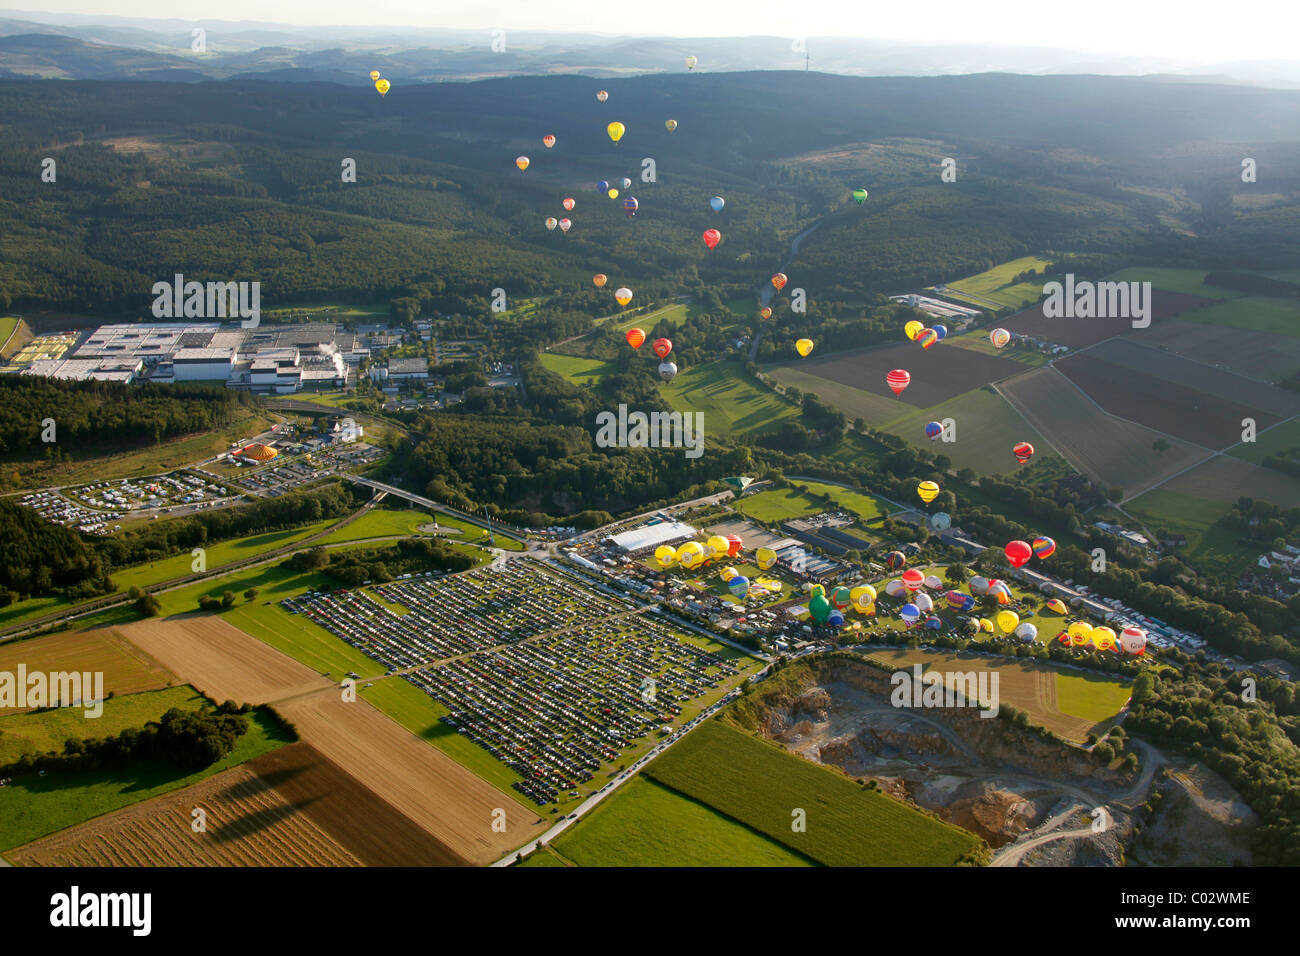 Aerial view, 20th Warsteiner Montgolfiade, hot air balloon festival with nearly 200 hot air balloons ascending into the sky Stock Photo